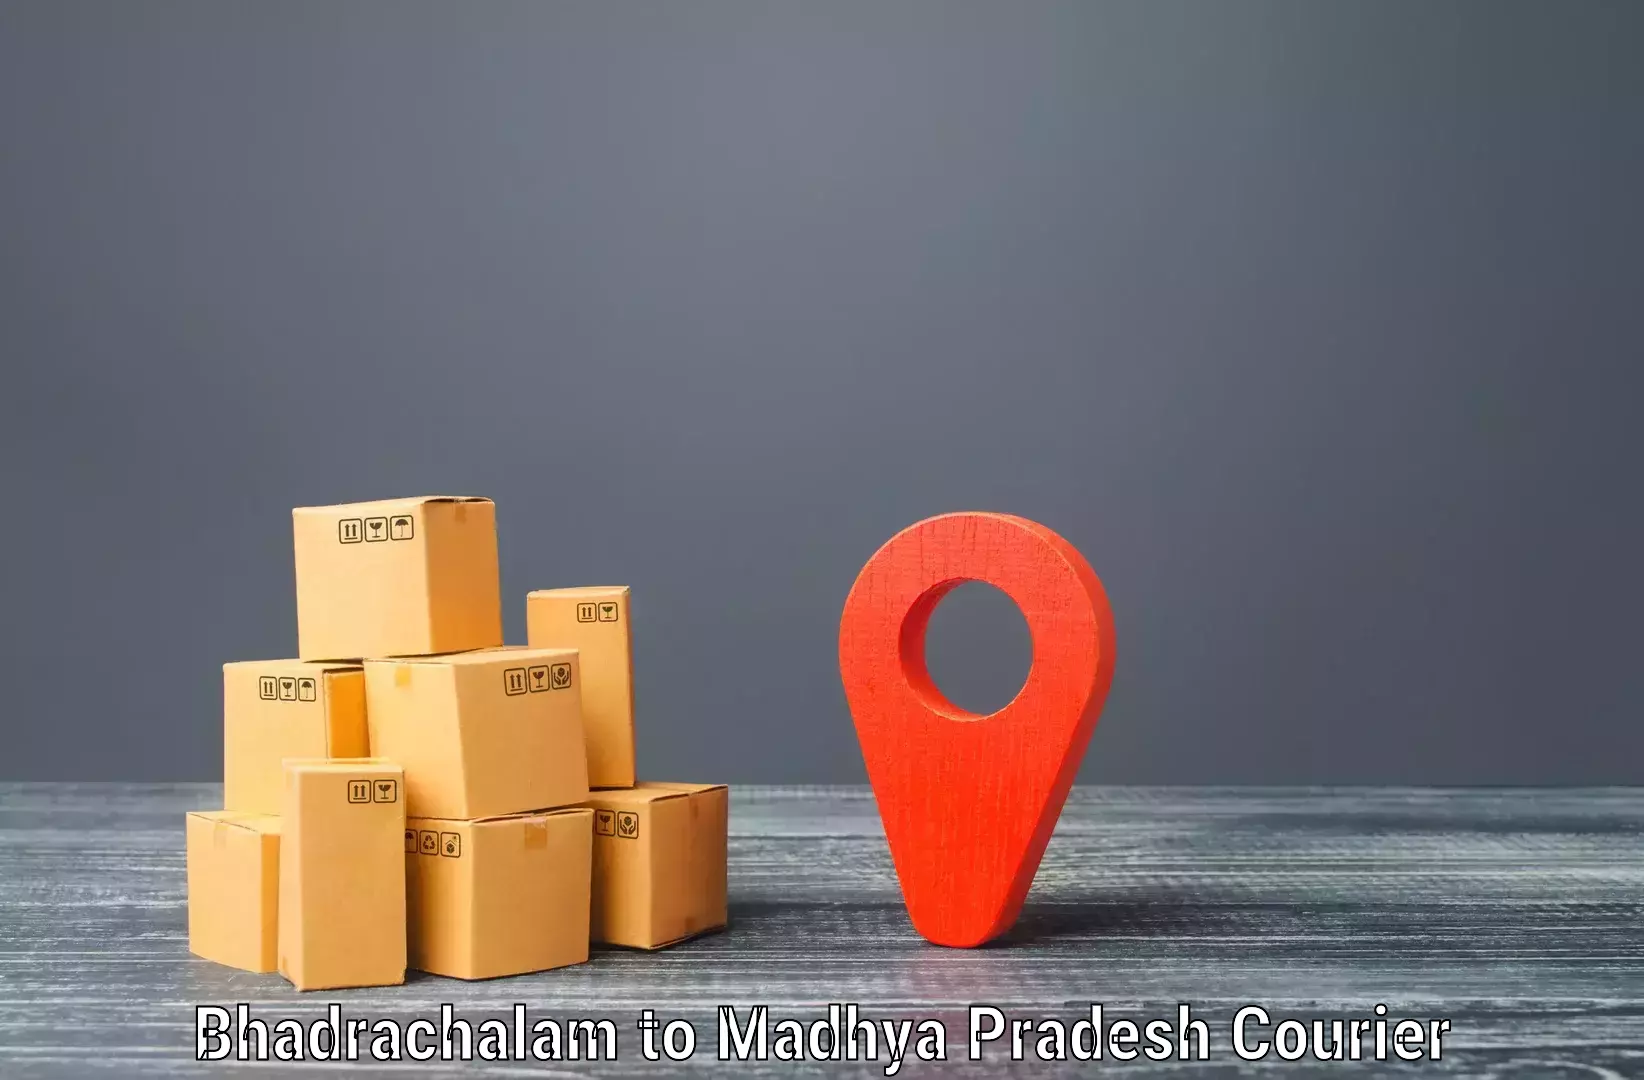 24/7 courier service in Bhadrachalam to Nagda